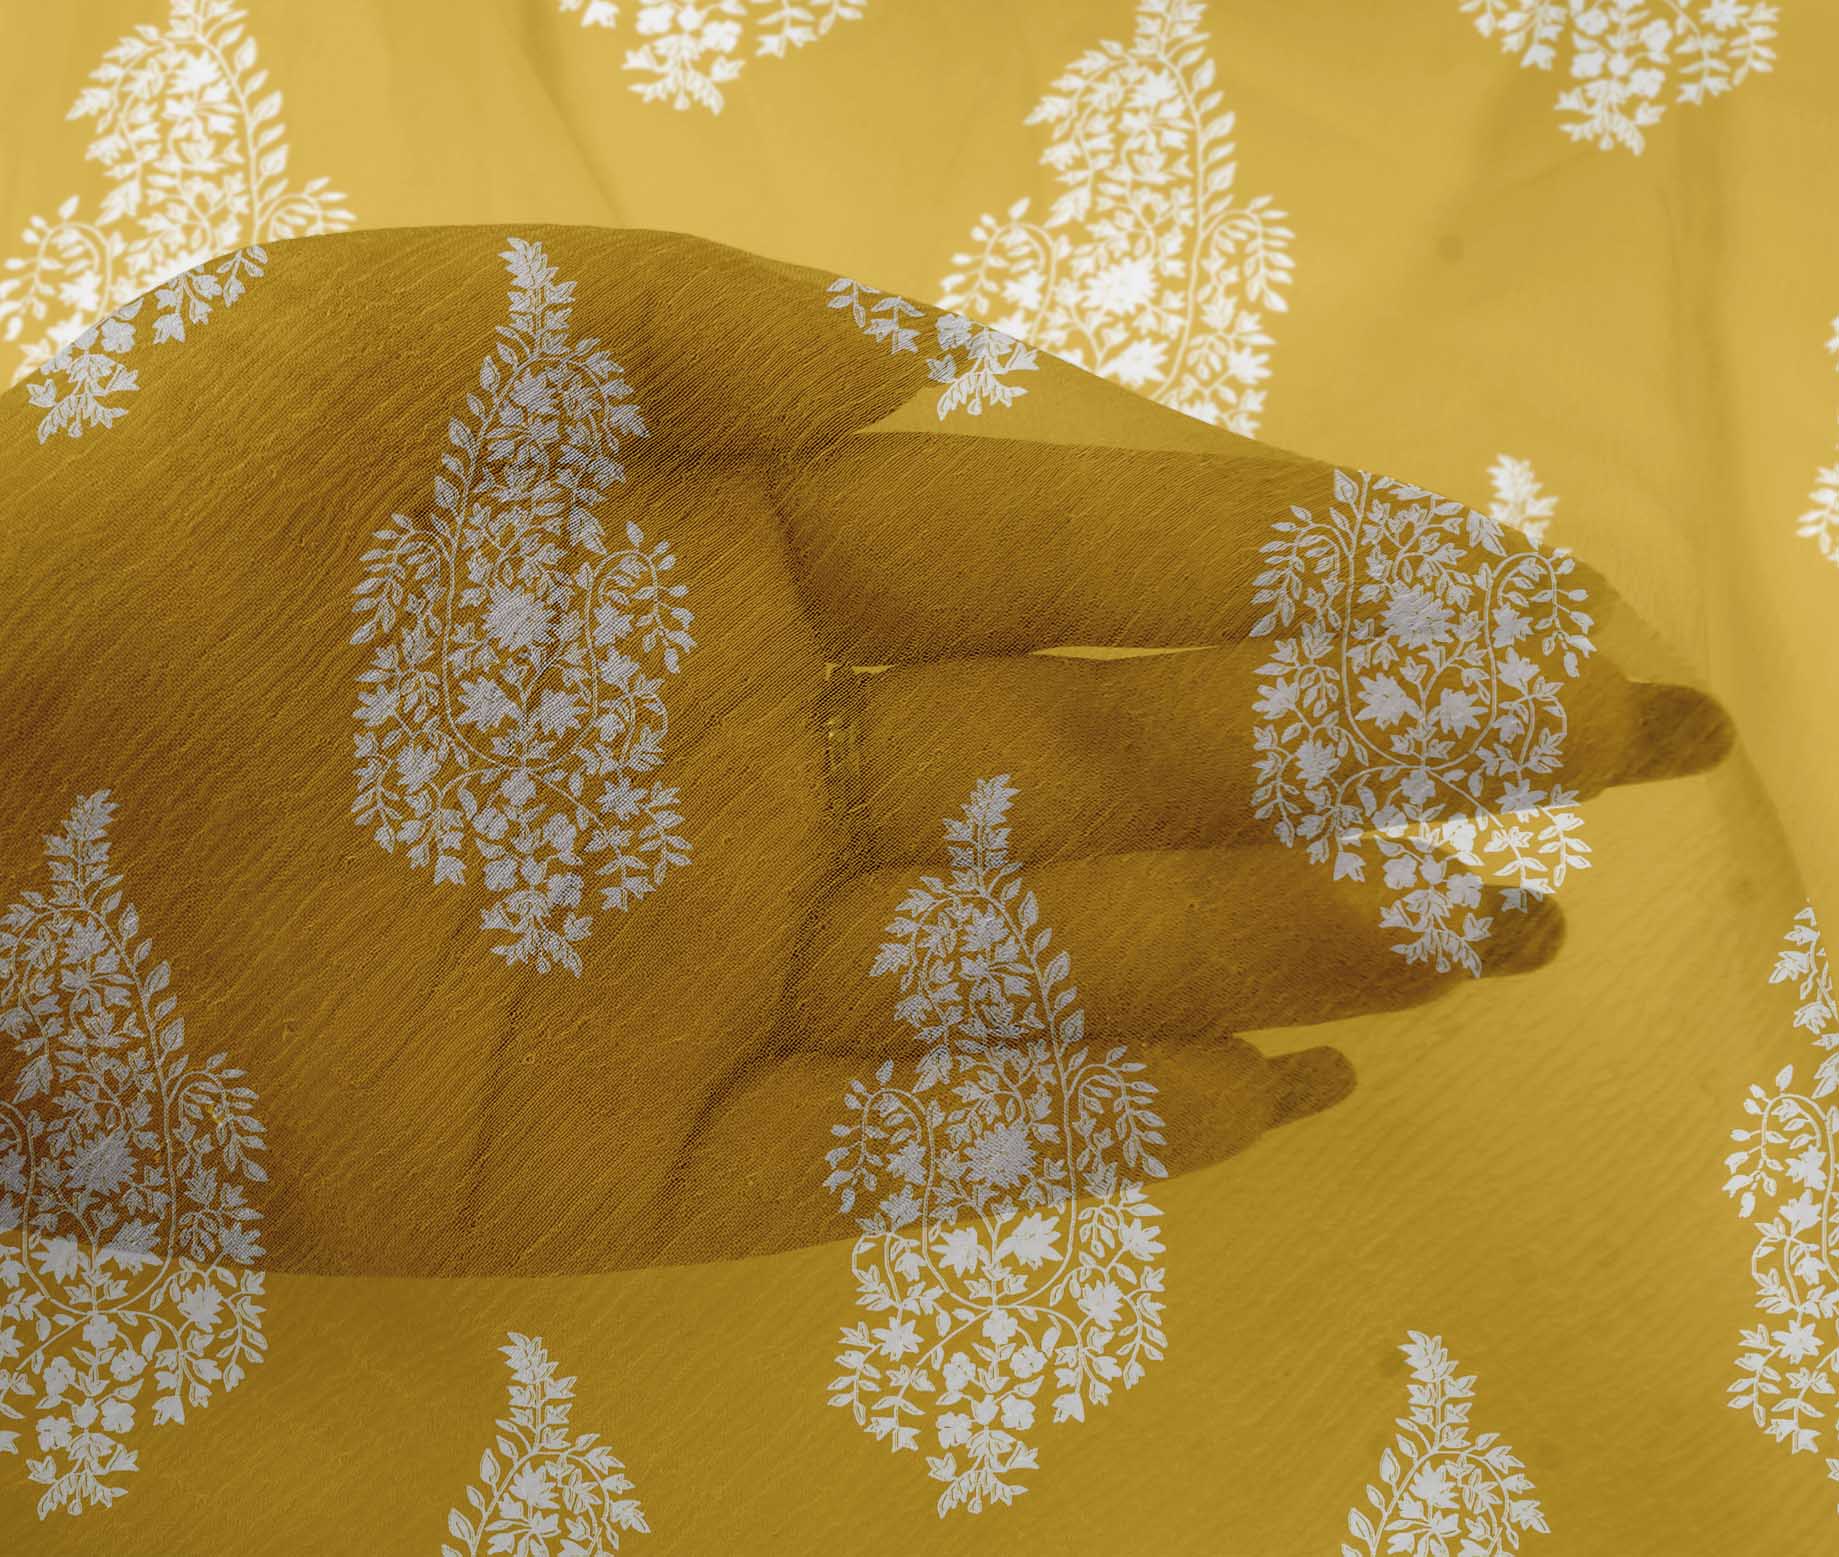 oneOone Viscose Chiffon Yellow Fabric Block Fabric For Sewing Printed ...